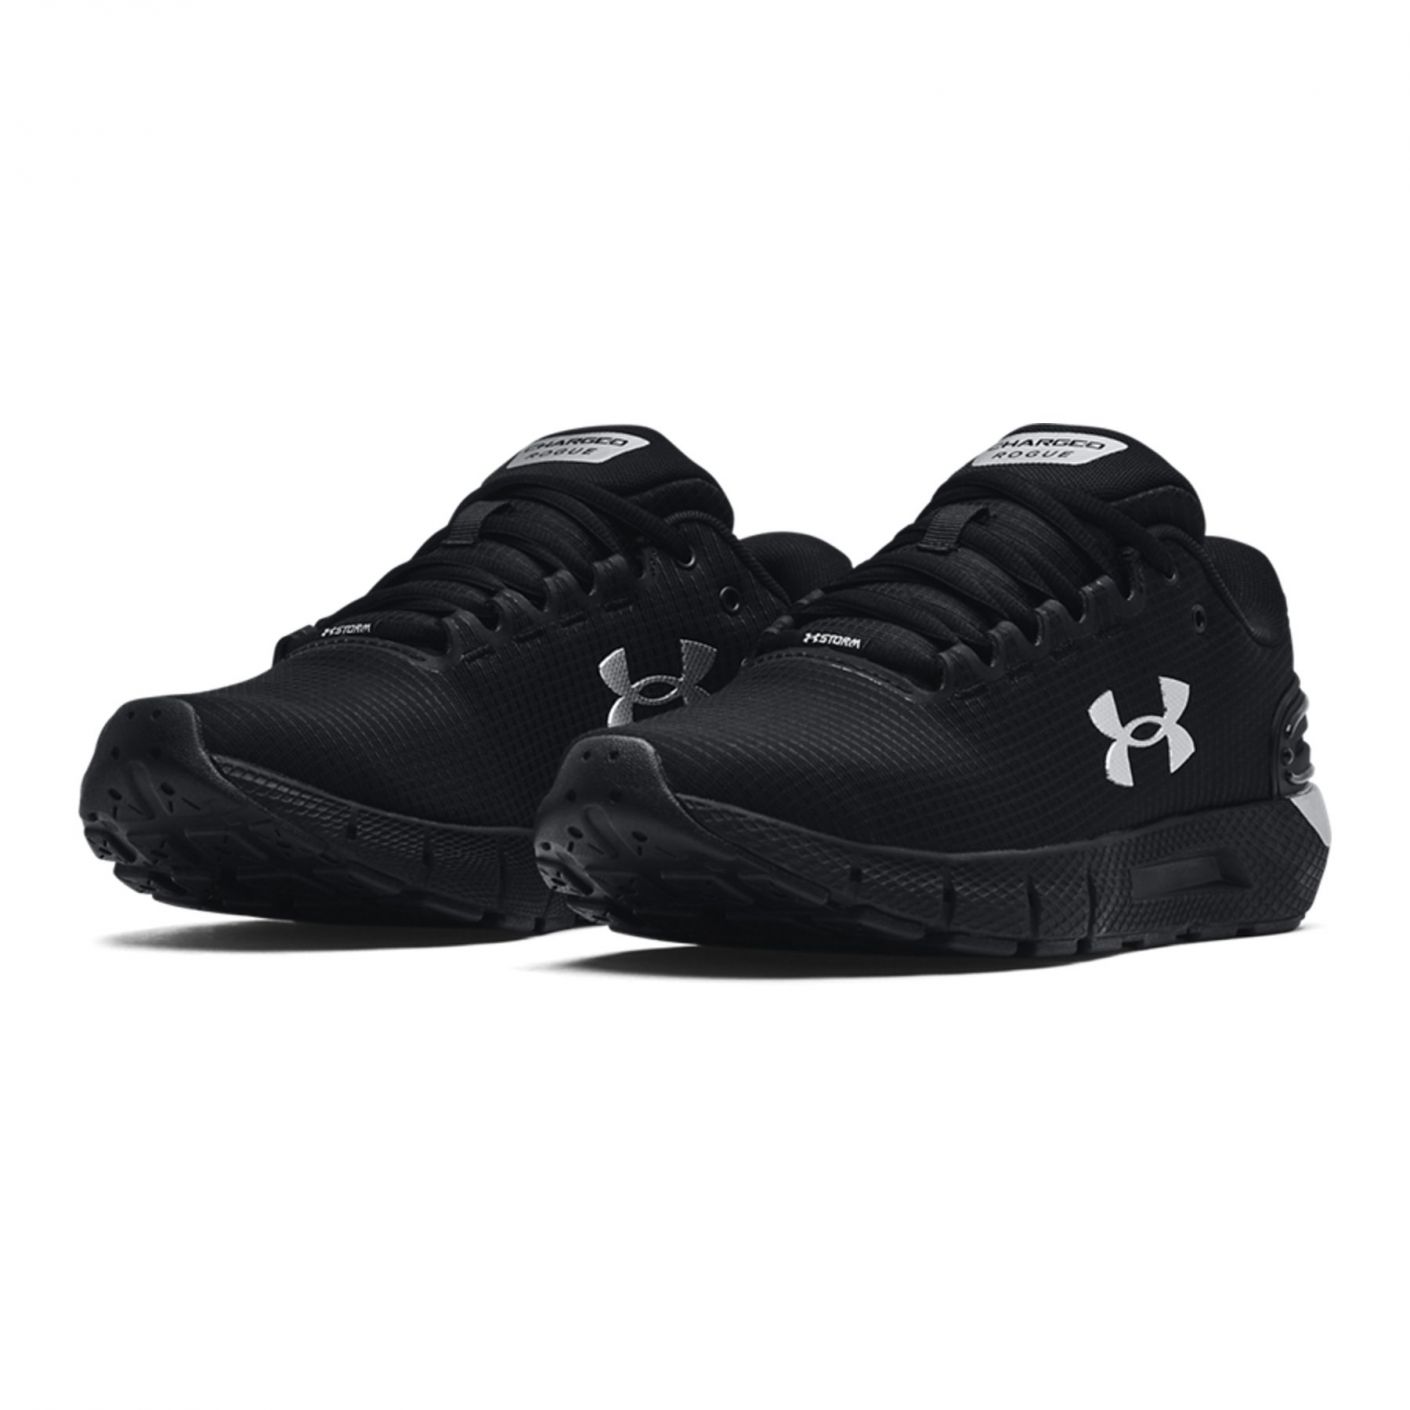 Under Armour Charged Rogue 2.5 Storm Black da Uomo